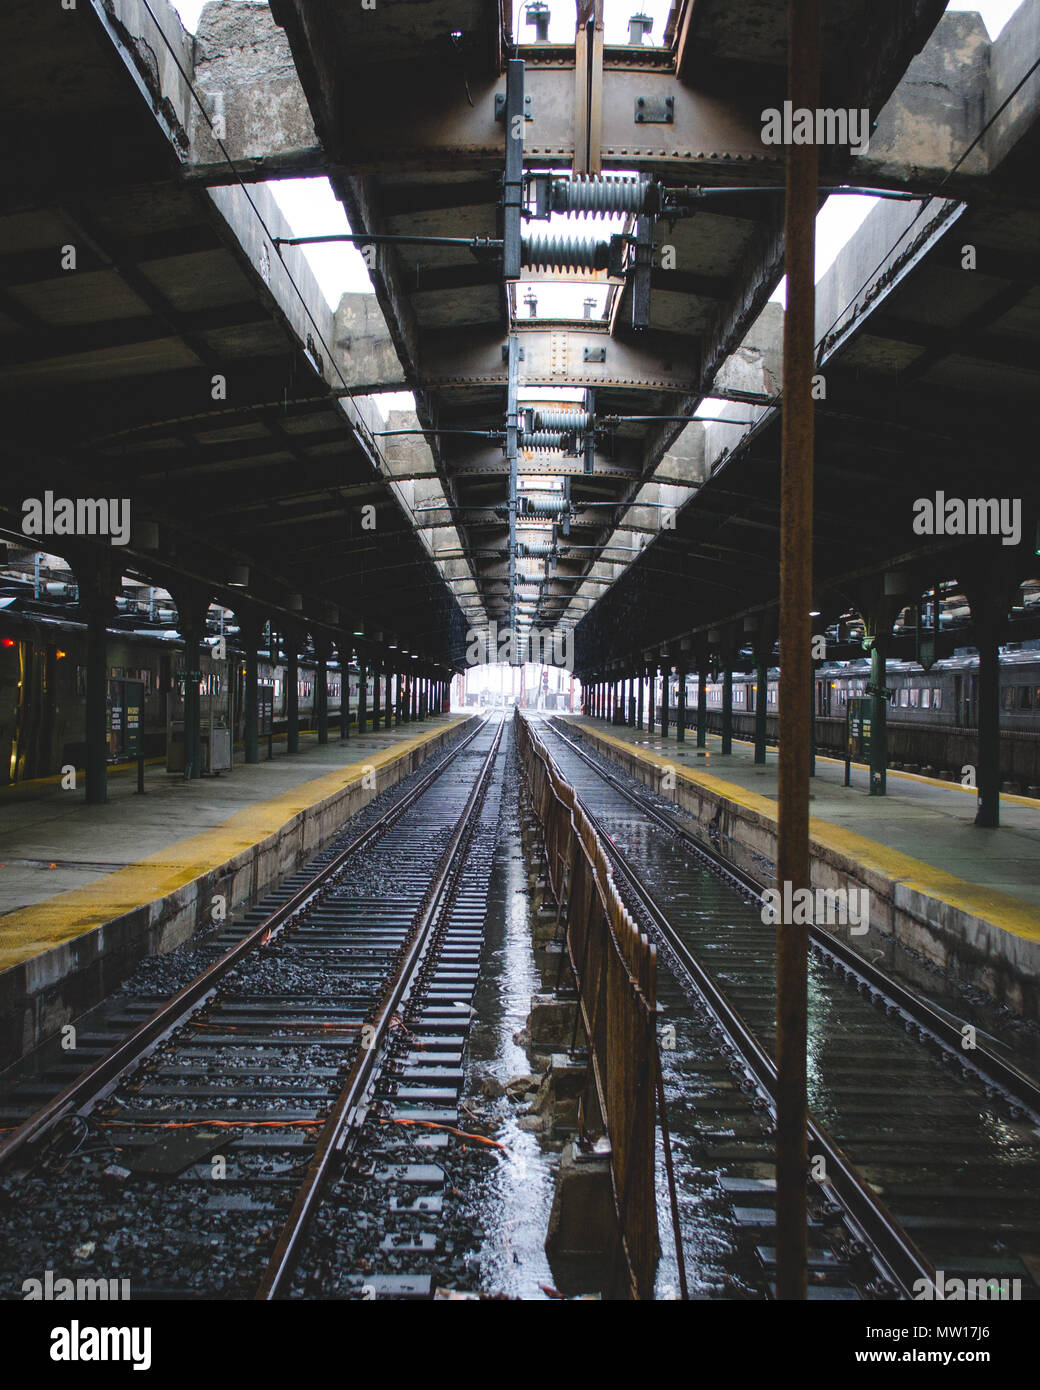 Hoboken Train Station platform and empty track wet from melting snow and rain Stock Photo